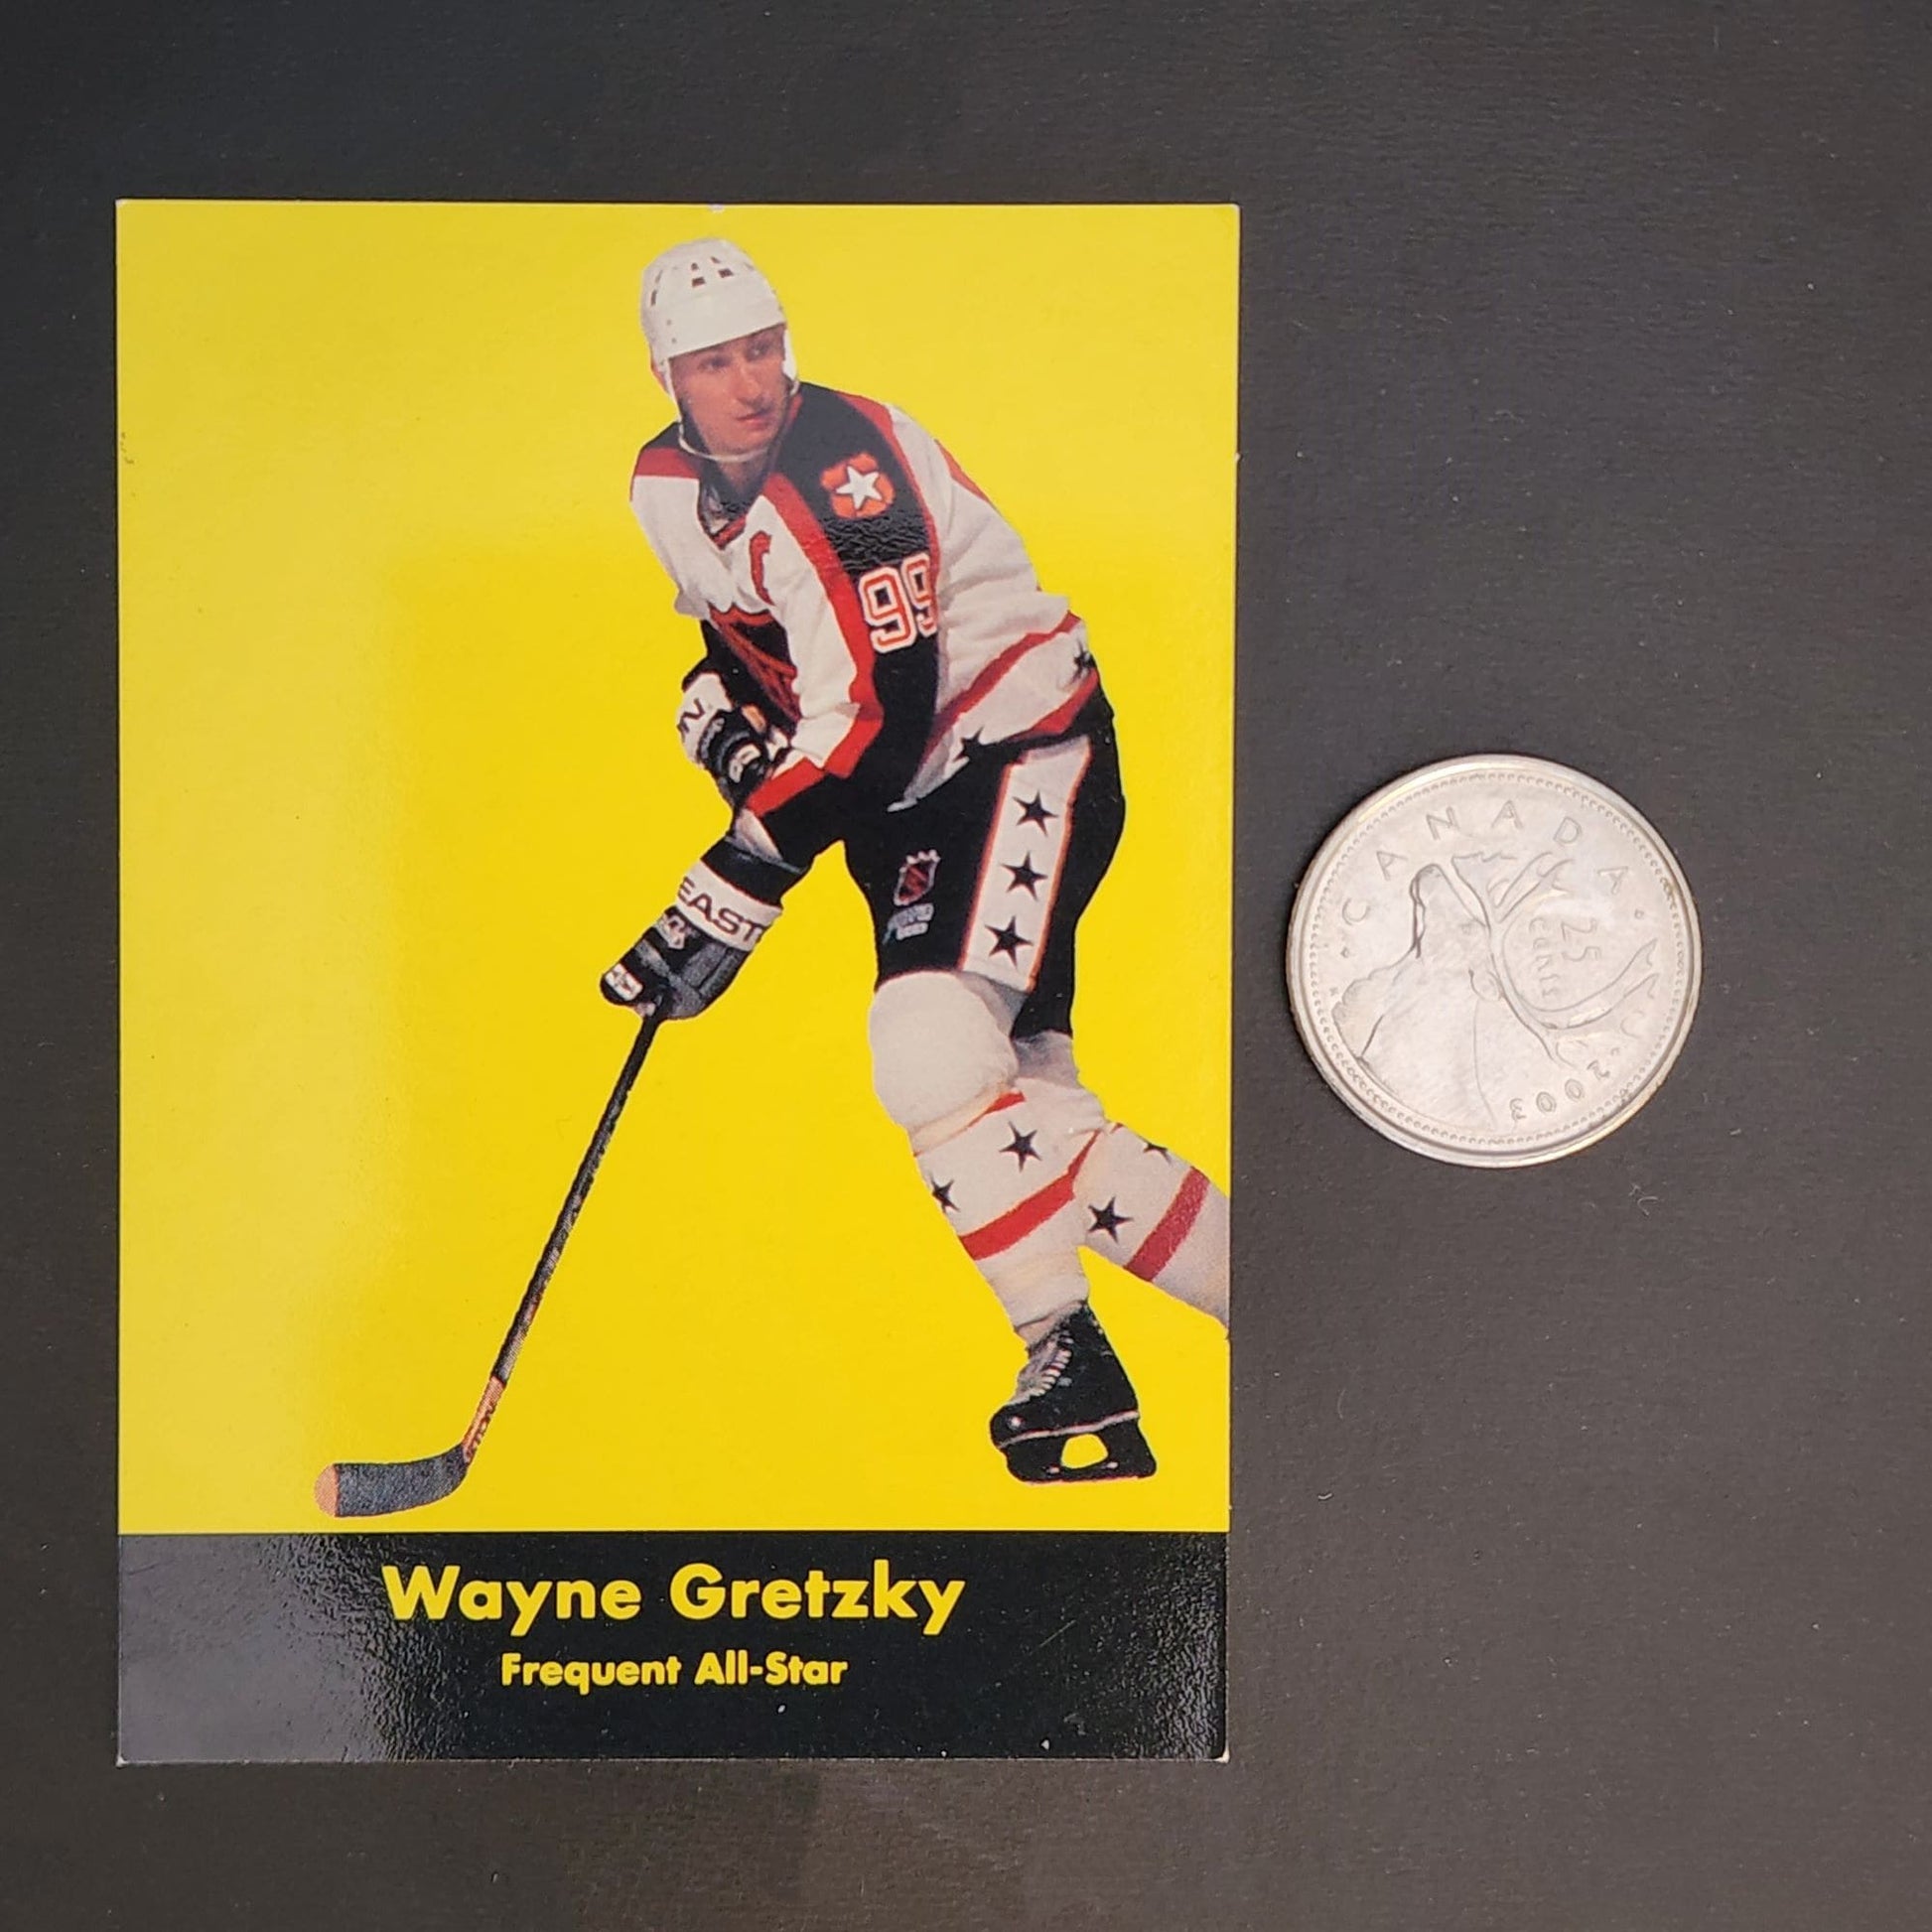 A hockey card featuring a coin placed beside it, showcasing the sport's memorabilia and potential value.